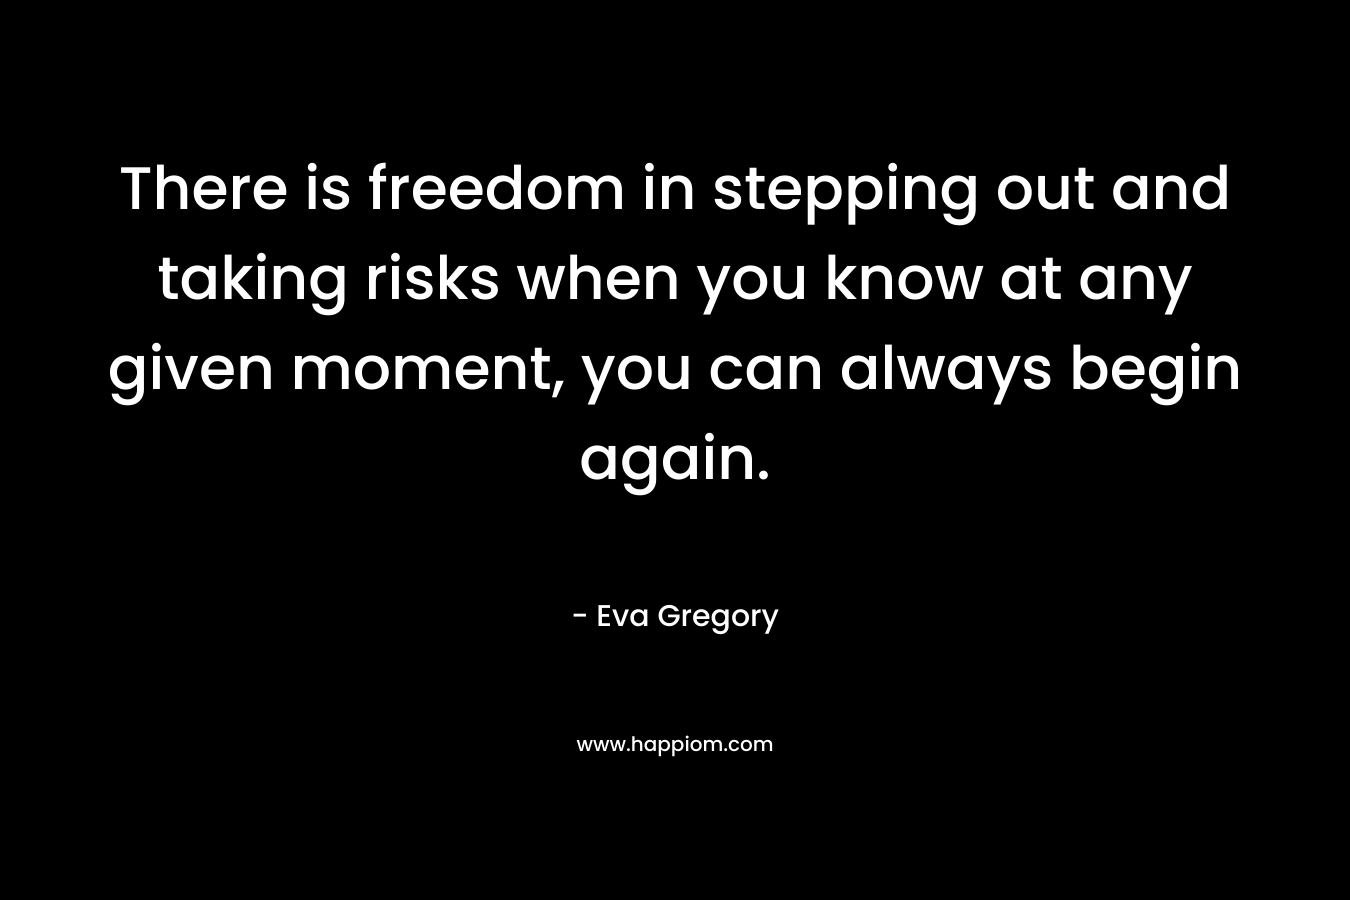 There is freedom in stepping out and taking risks when you know at any given moment, you can always begin again.